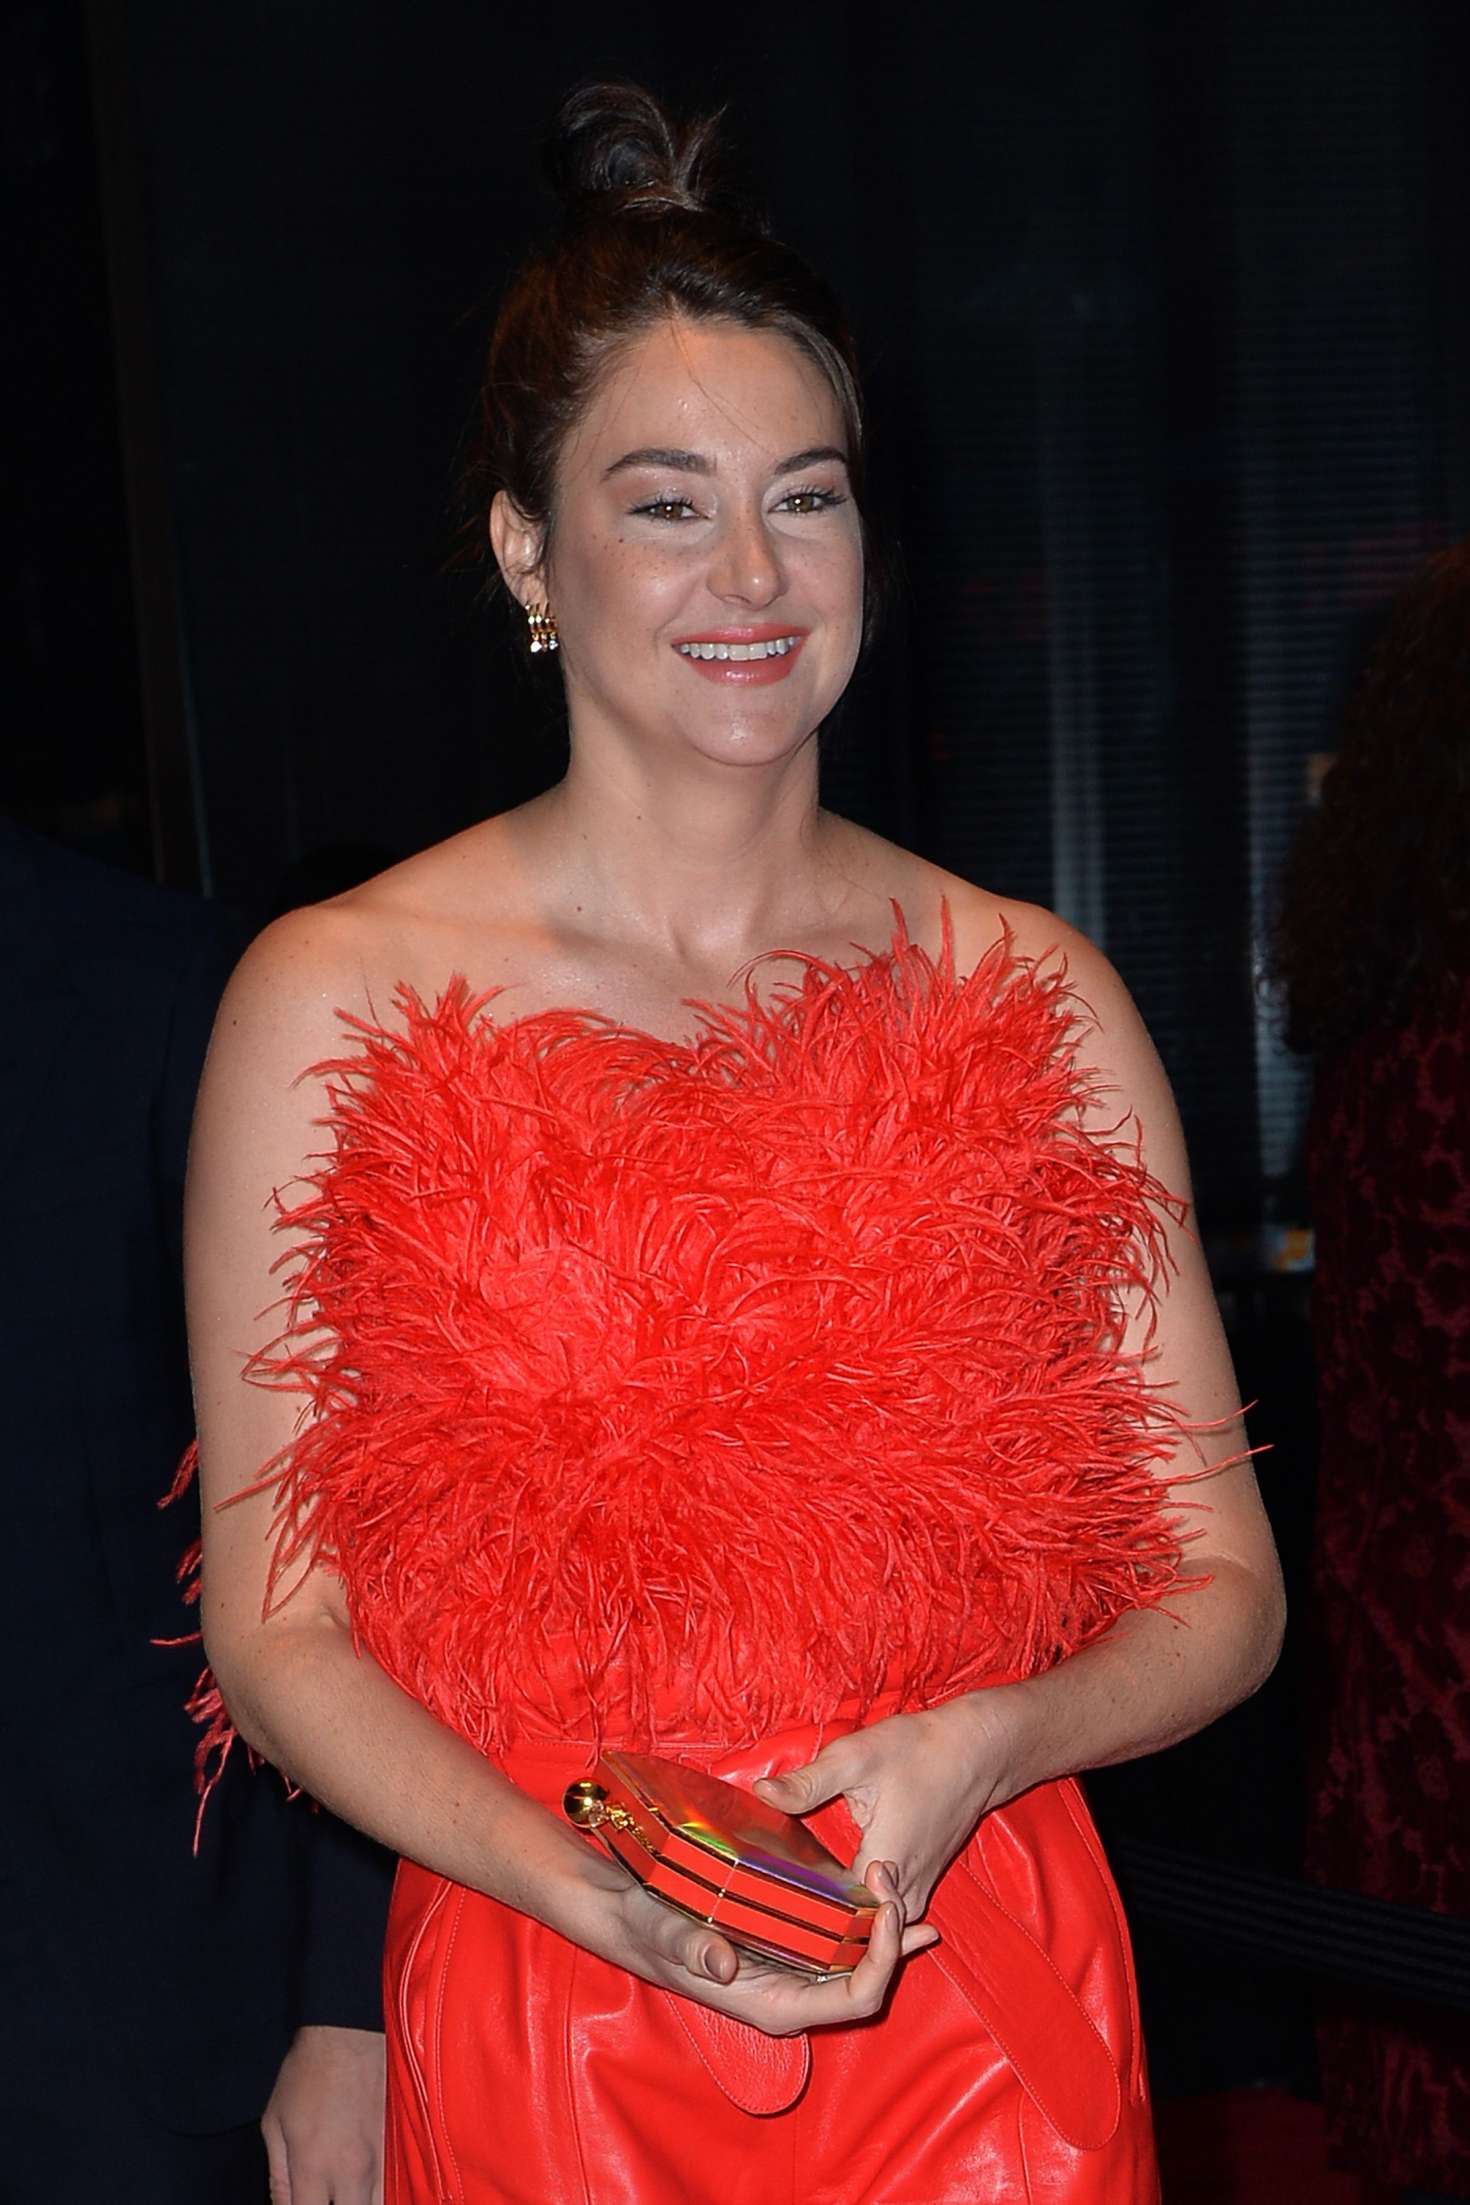 Shailene Woodley â€“ Virgin Voyages Scarlet Night Party in NY